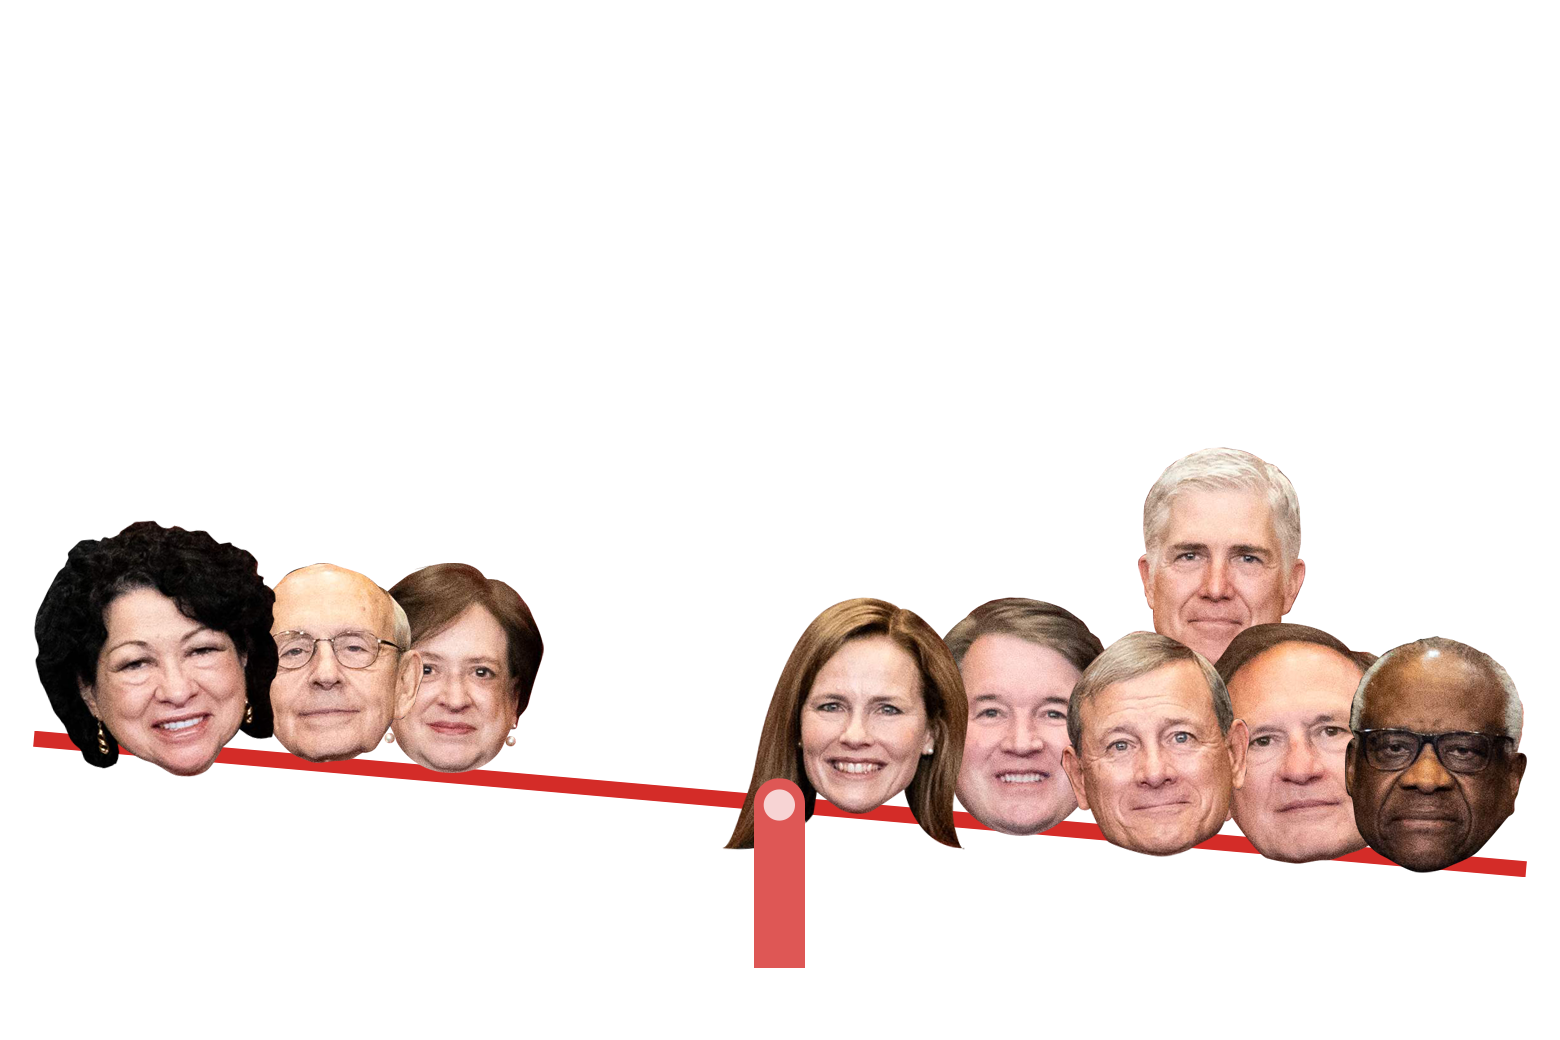 The heads of the Supreme Court justices on a seesaw, with the six conservatives outweighing the three liberals.